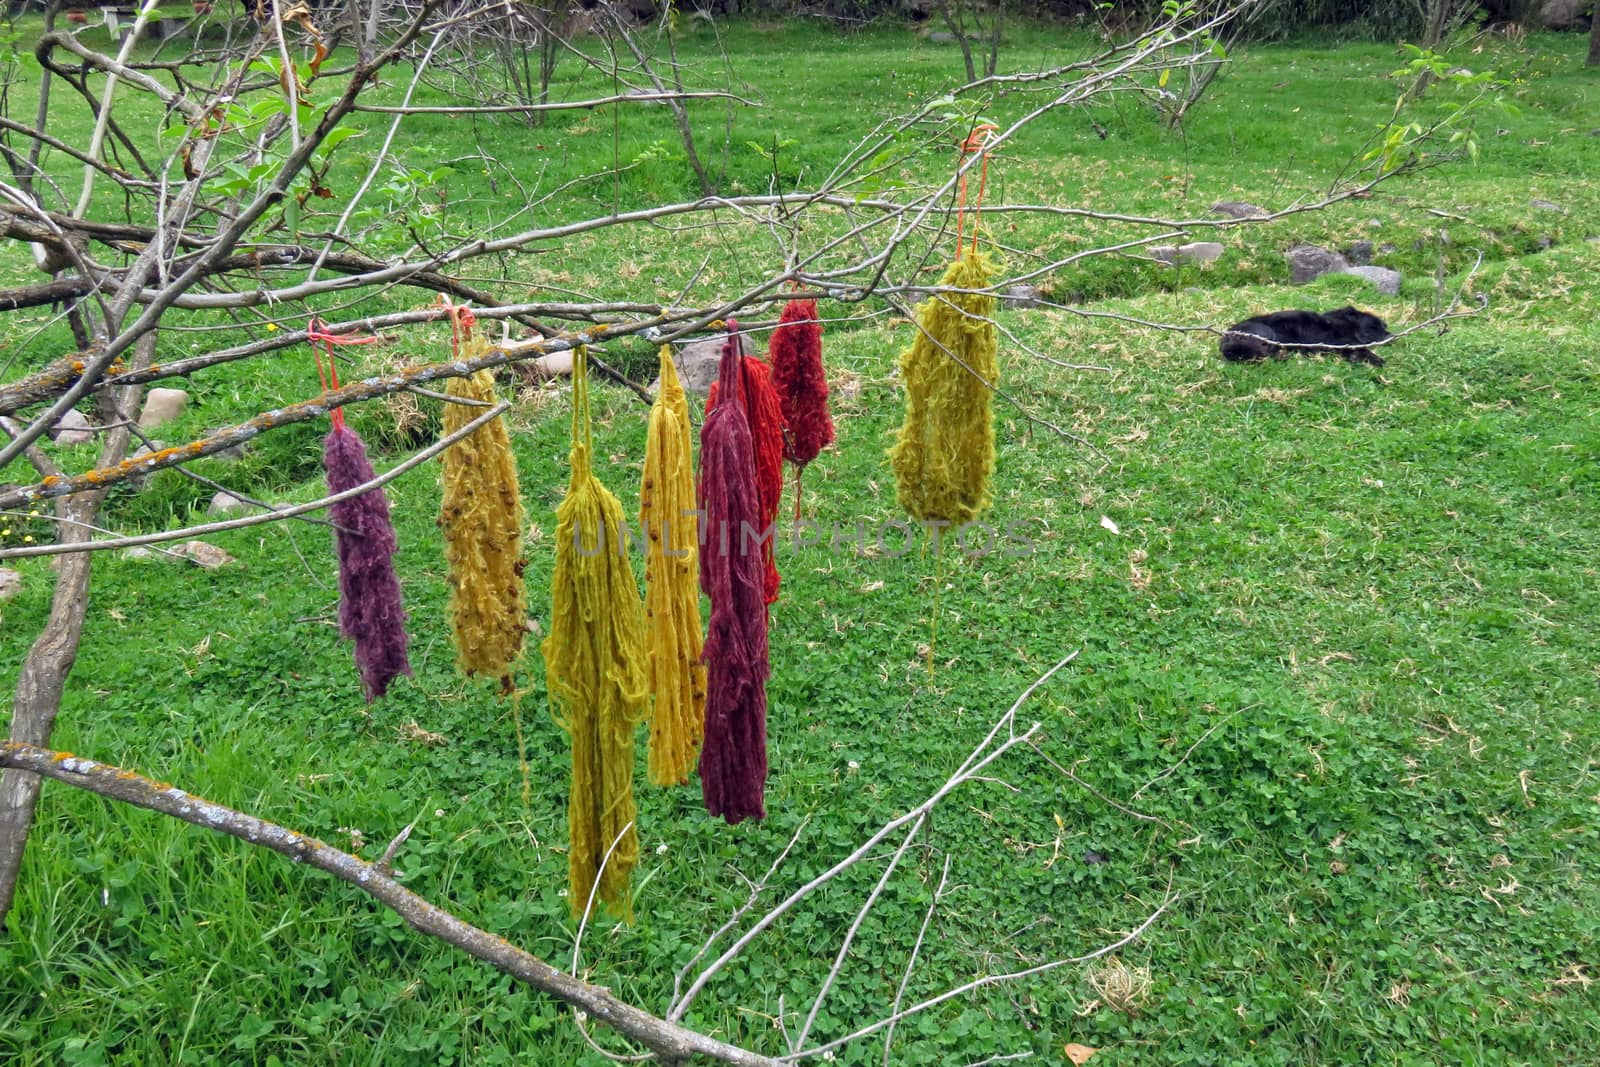 Bundles of inca colored dyed wool drying on a tree in Peru, sacred valley.